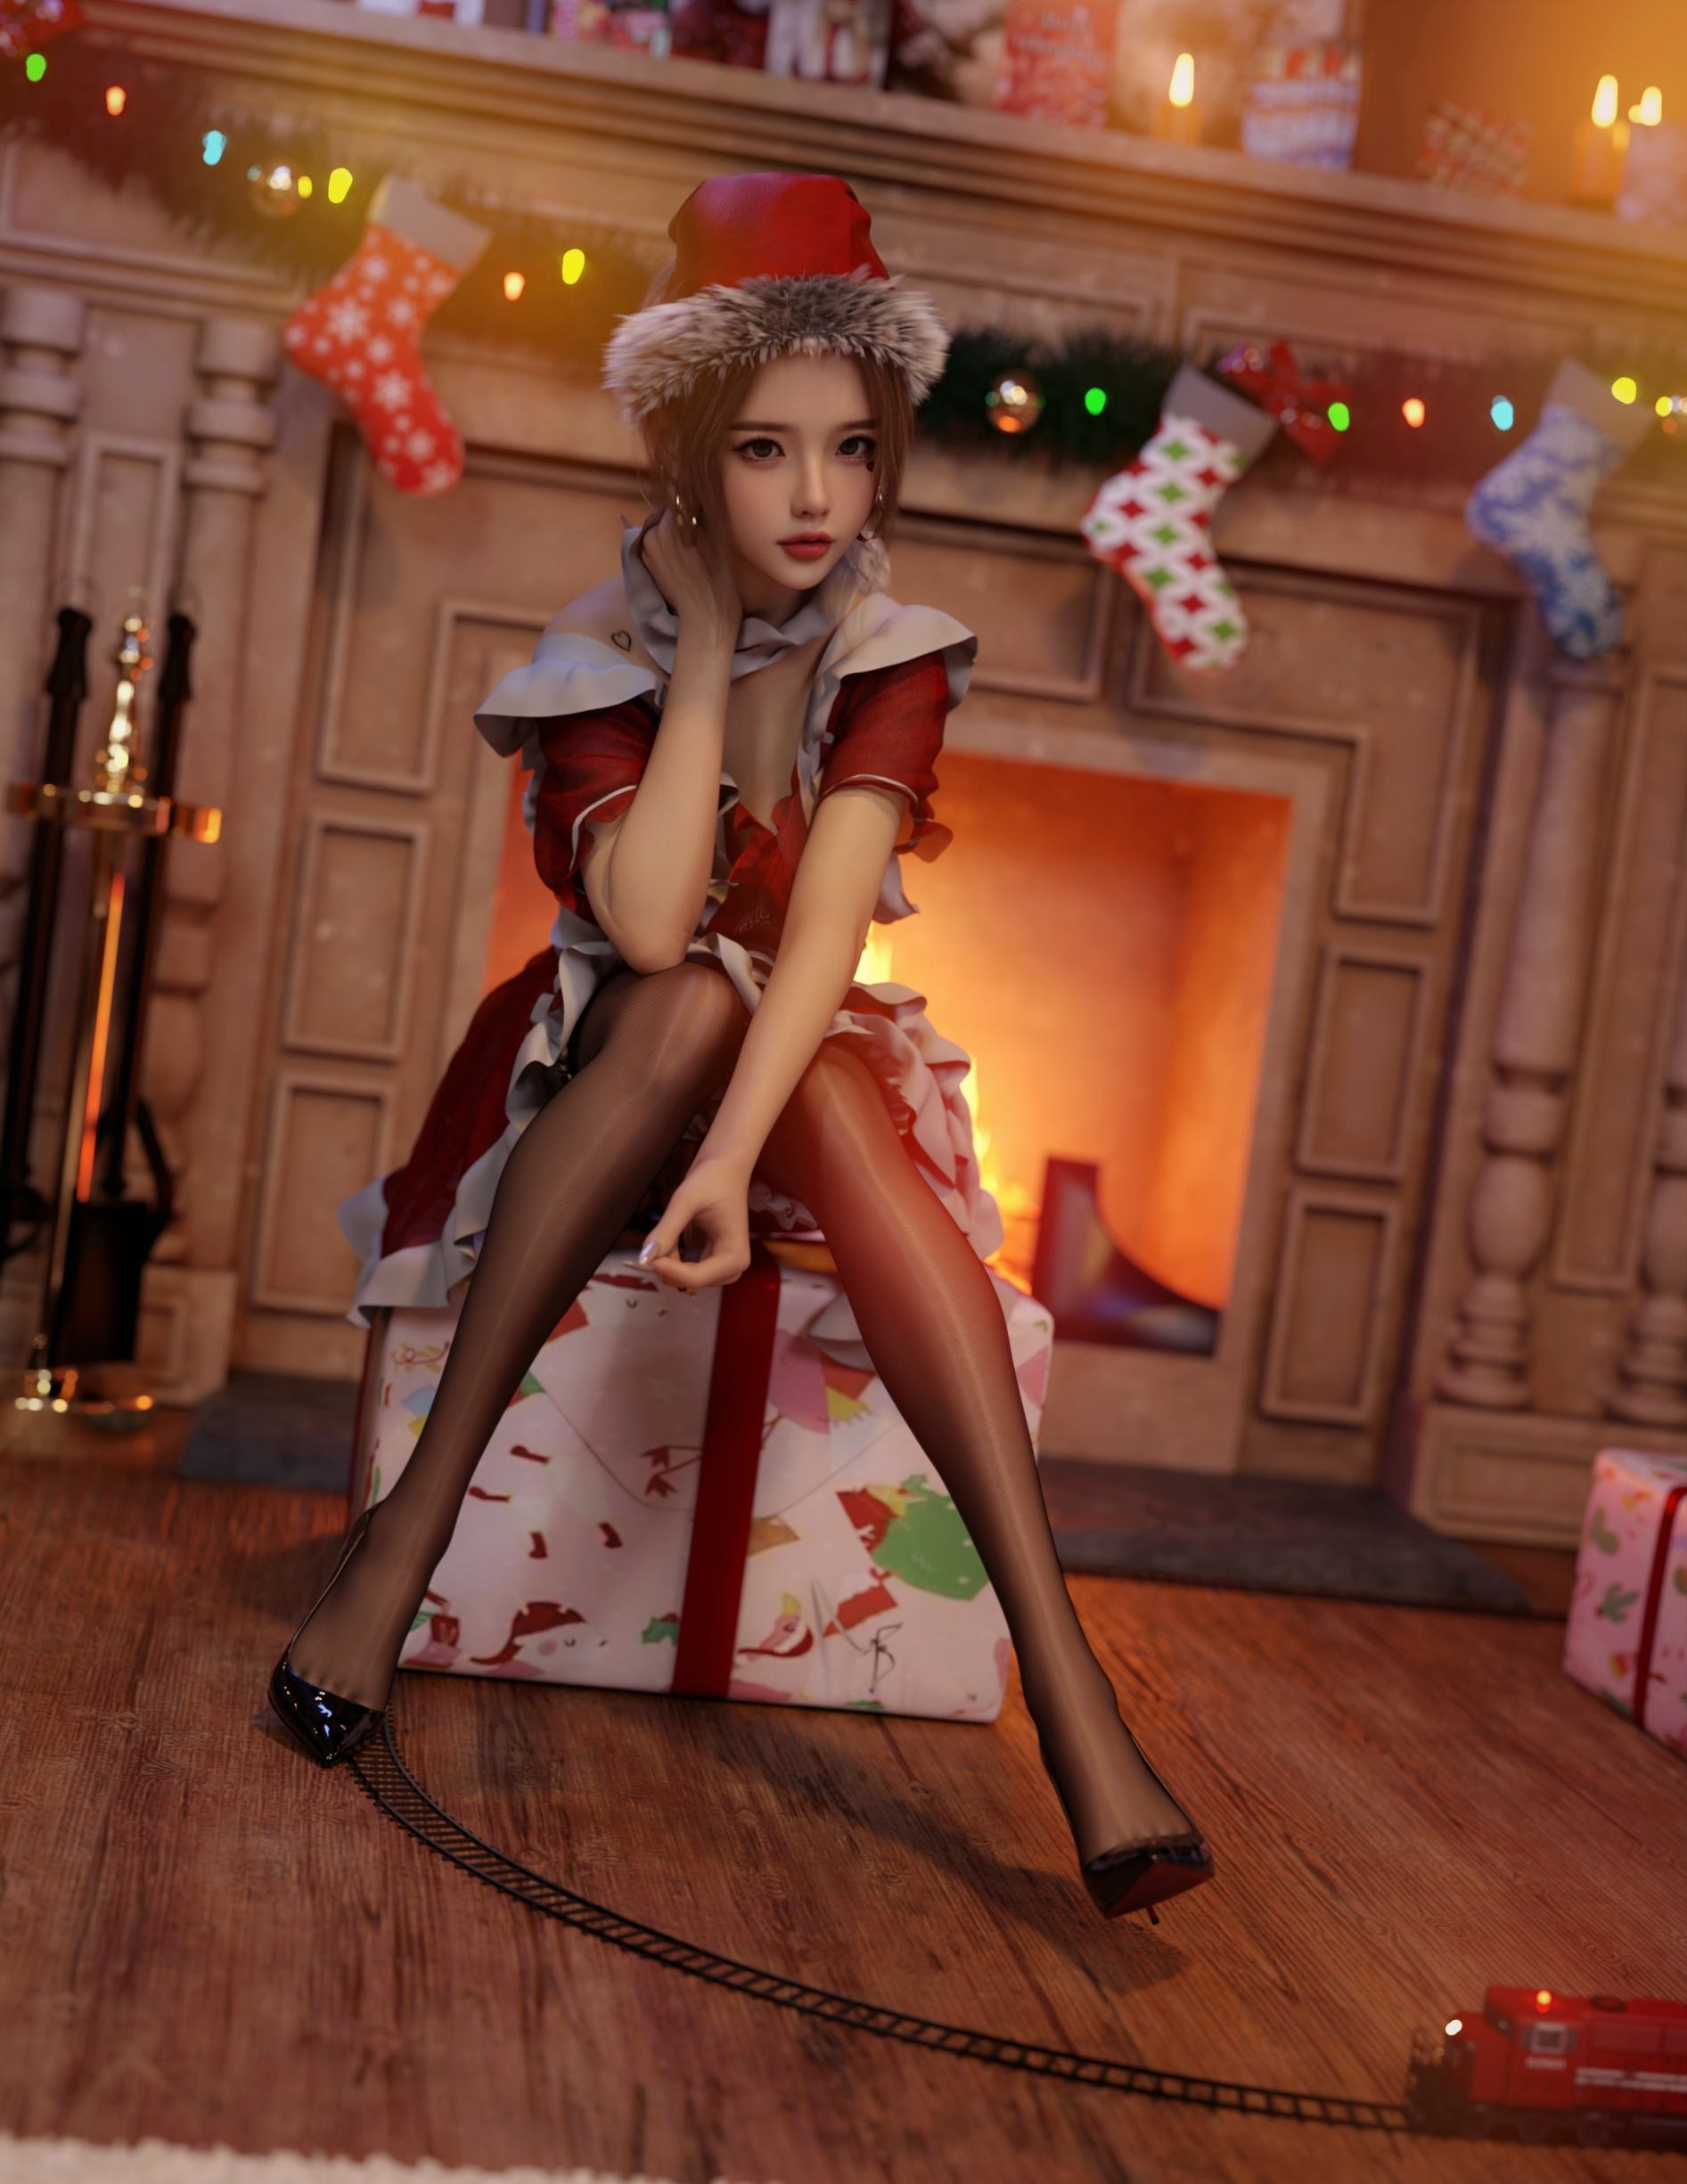 General 1893x2451 Luck zs CGI Christmas black stockings Christmas tree digital art Christmas presents sitting indoors women indoors looking at viewer fire fireplace women Asian Christmas ornaments  portrait display floor wooden floor